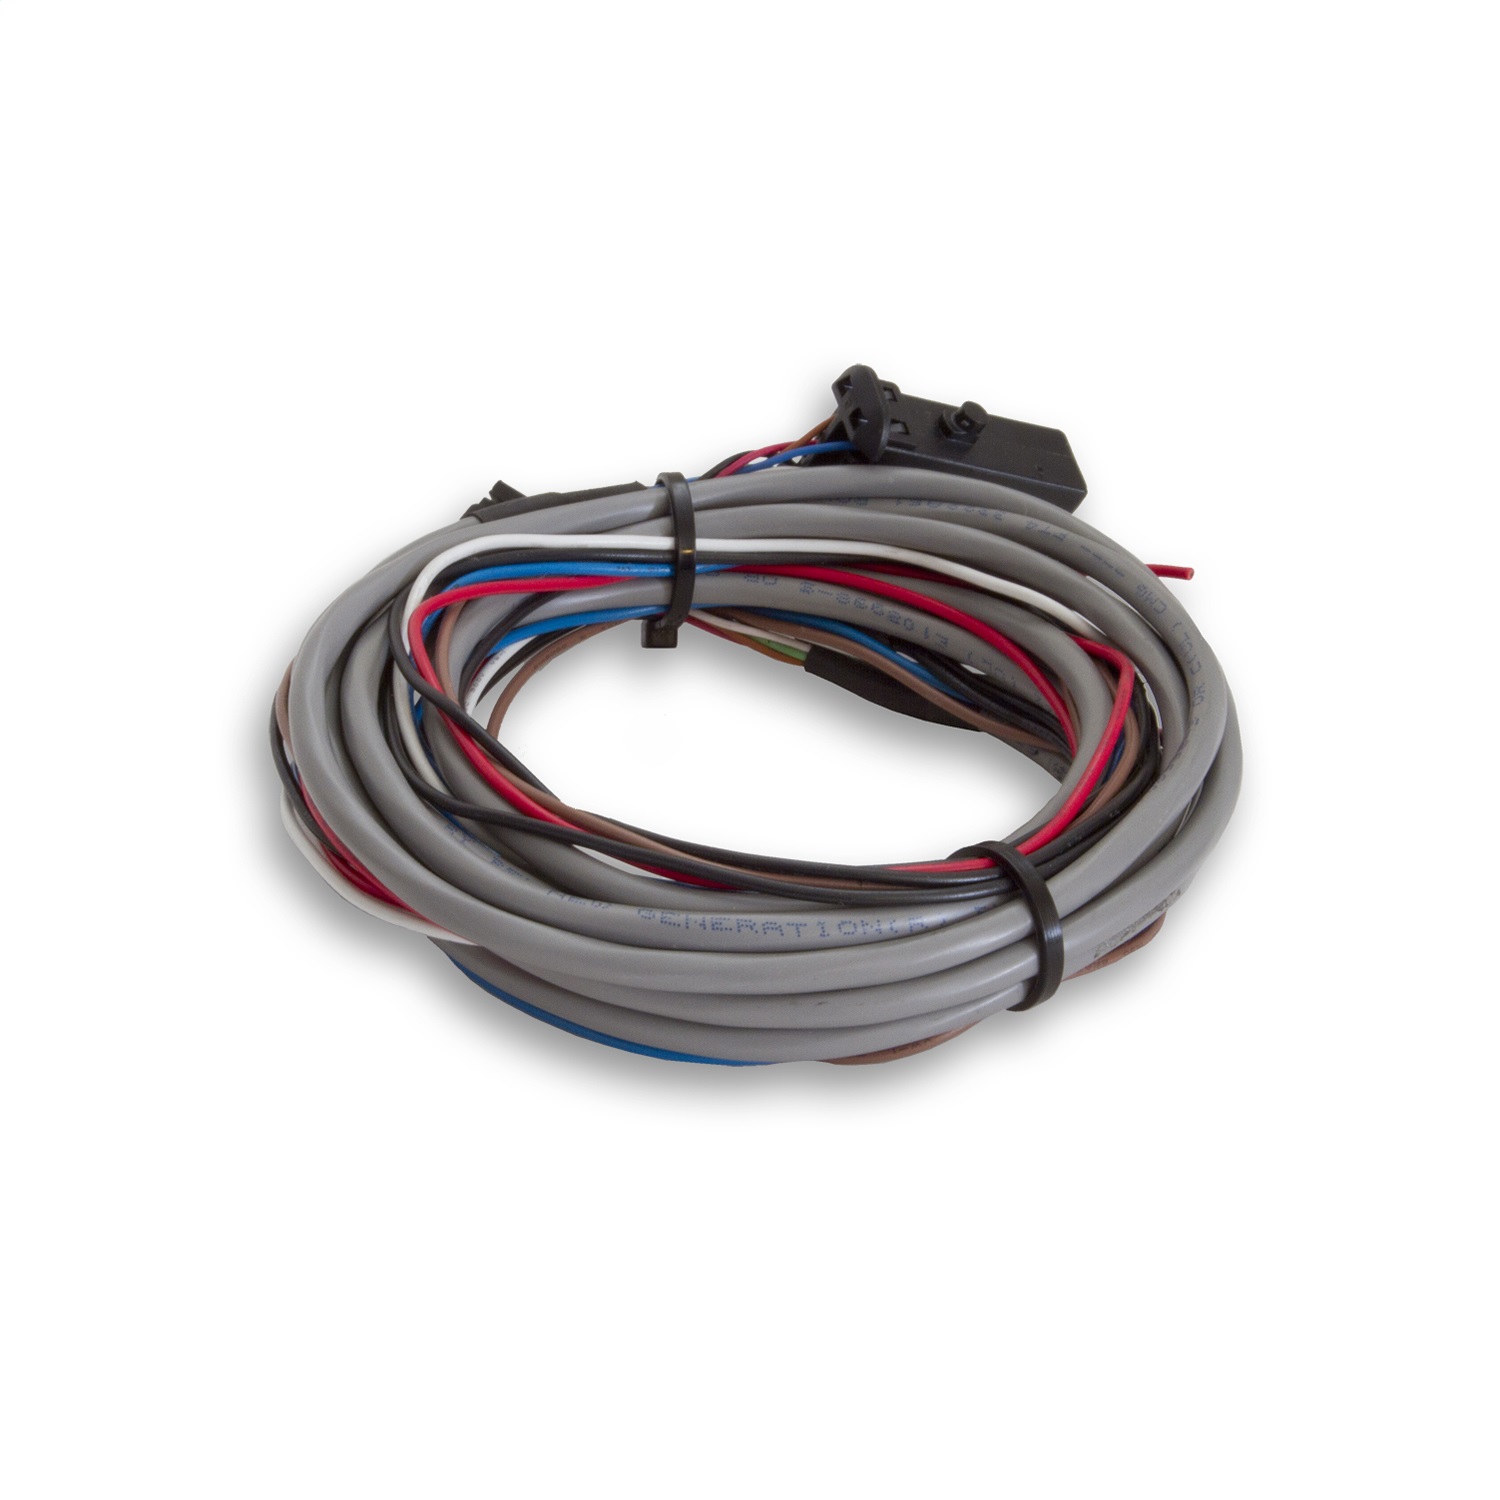 Auto Meter Auto Meter 5232 Wide Band Wire Harness